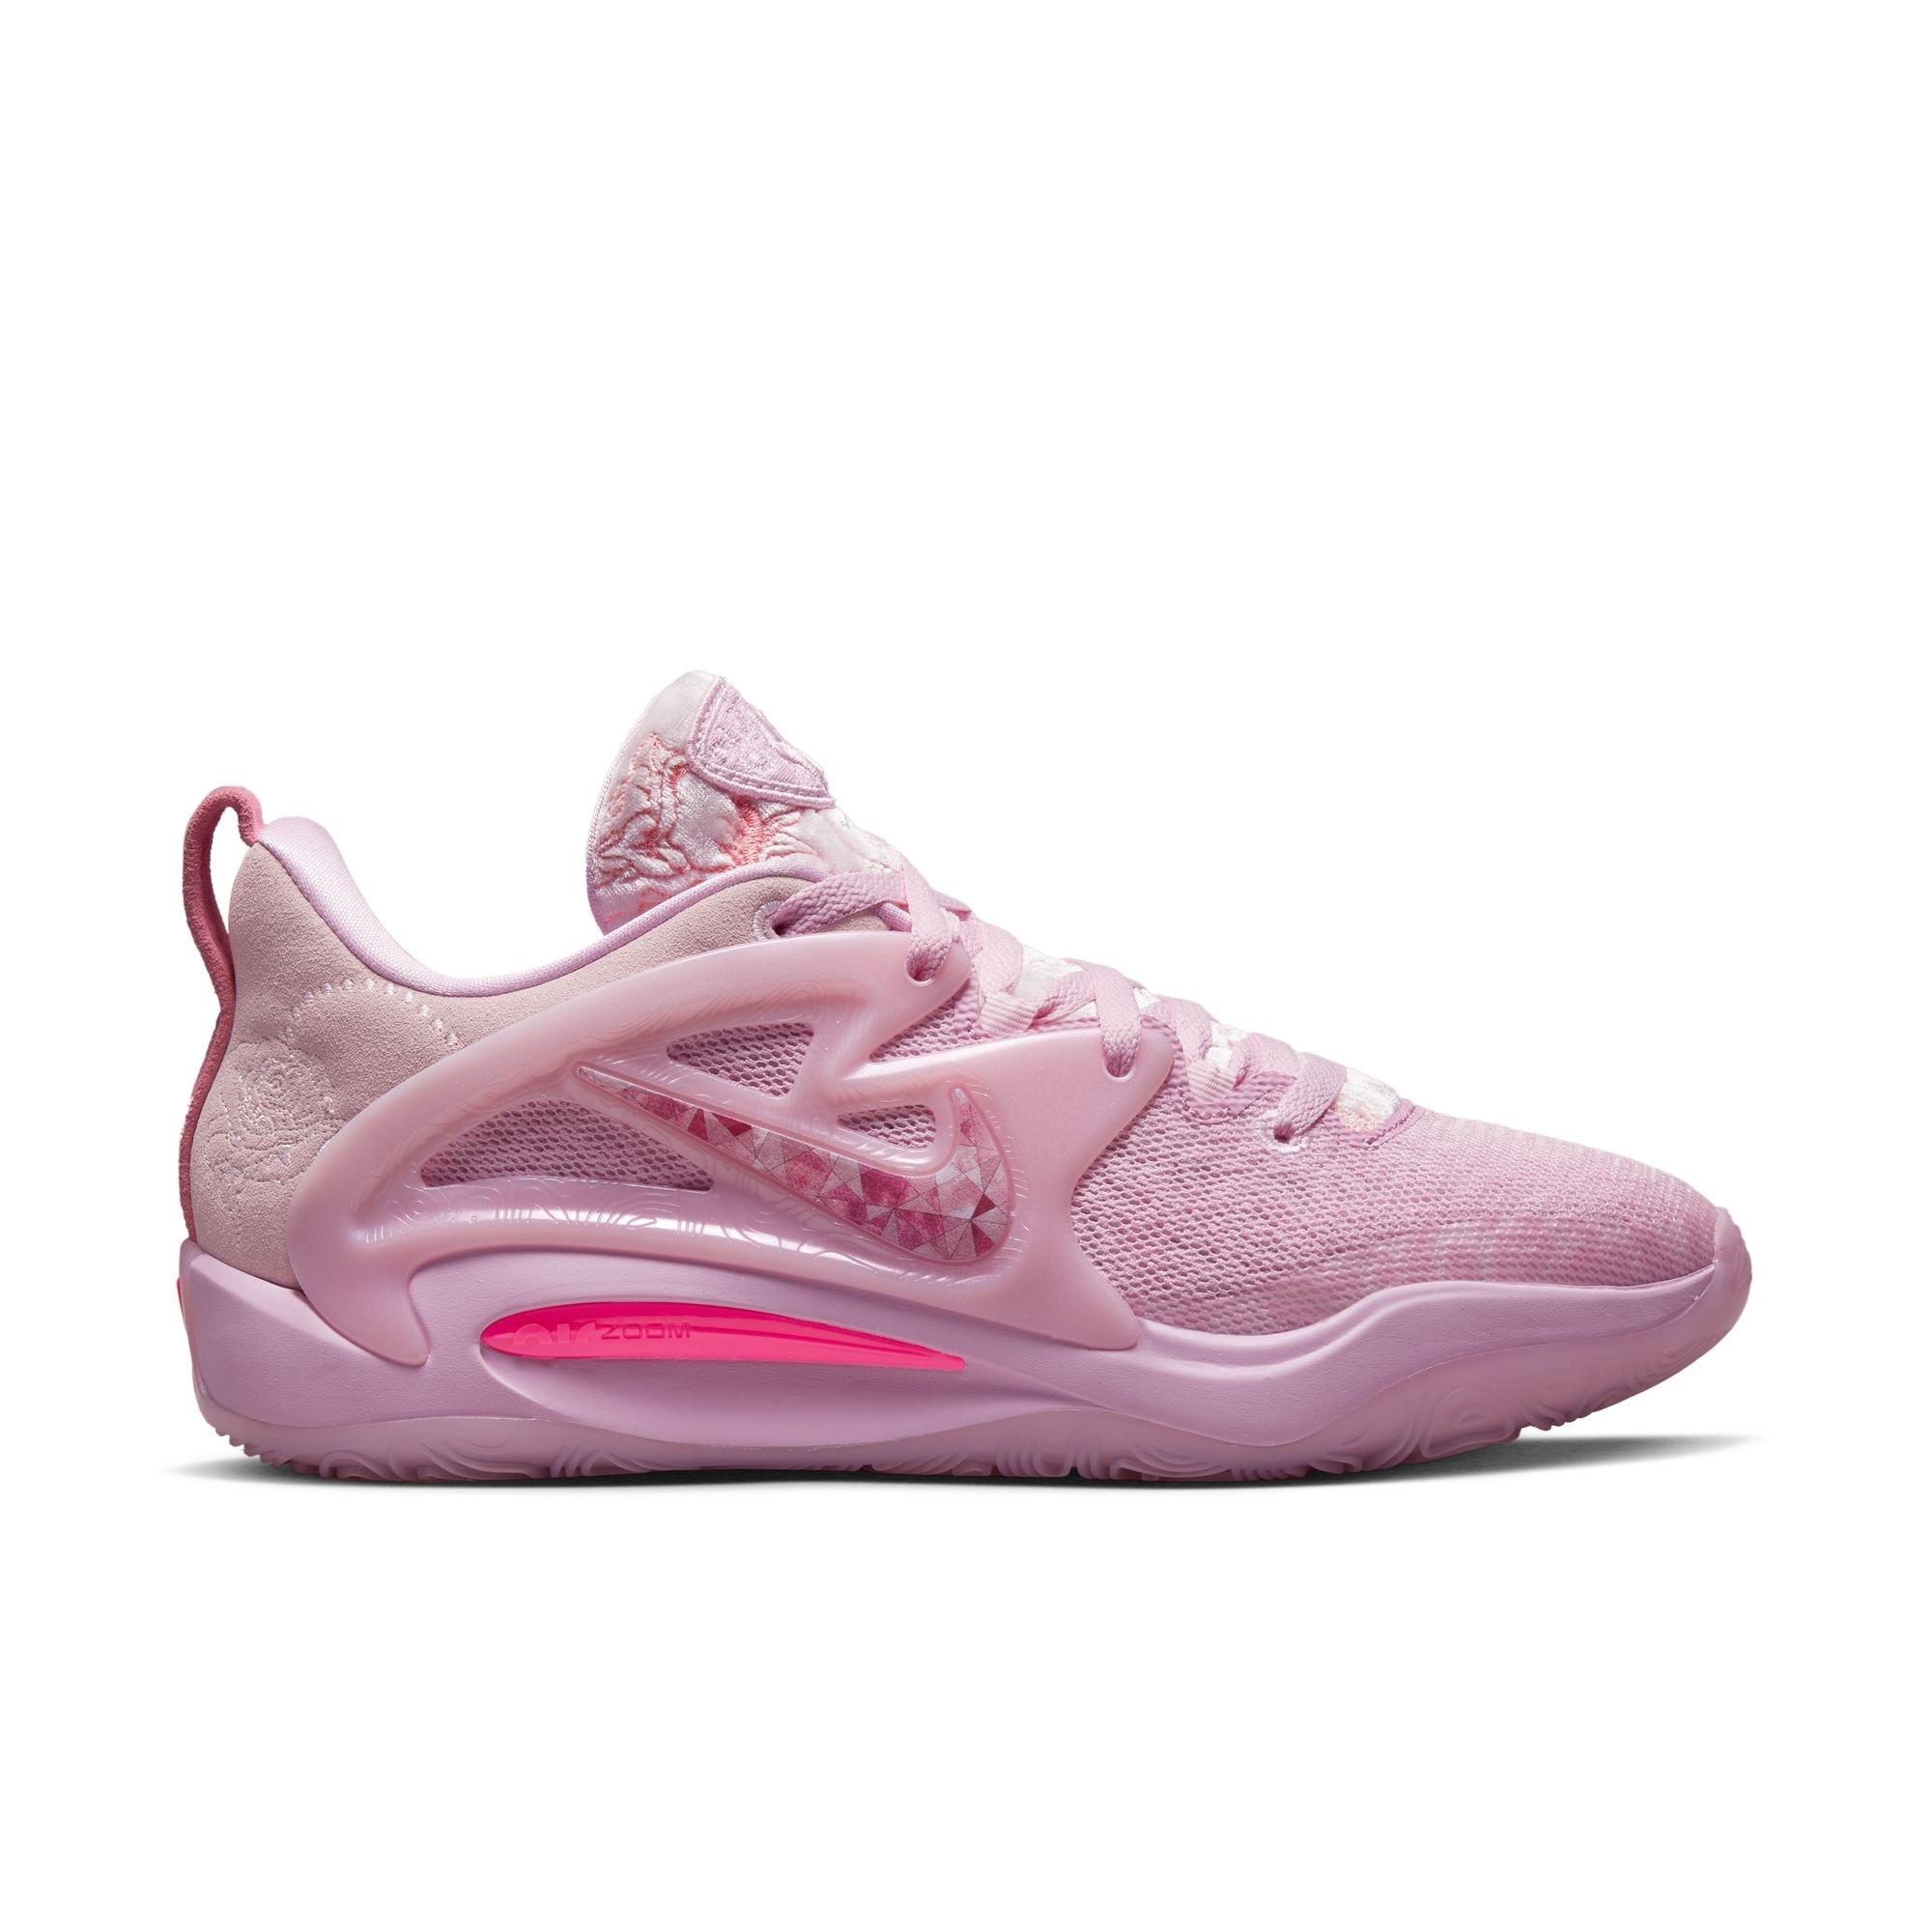 light pink basketball shoes - Google Search